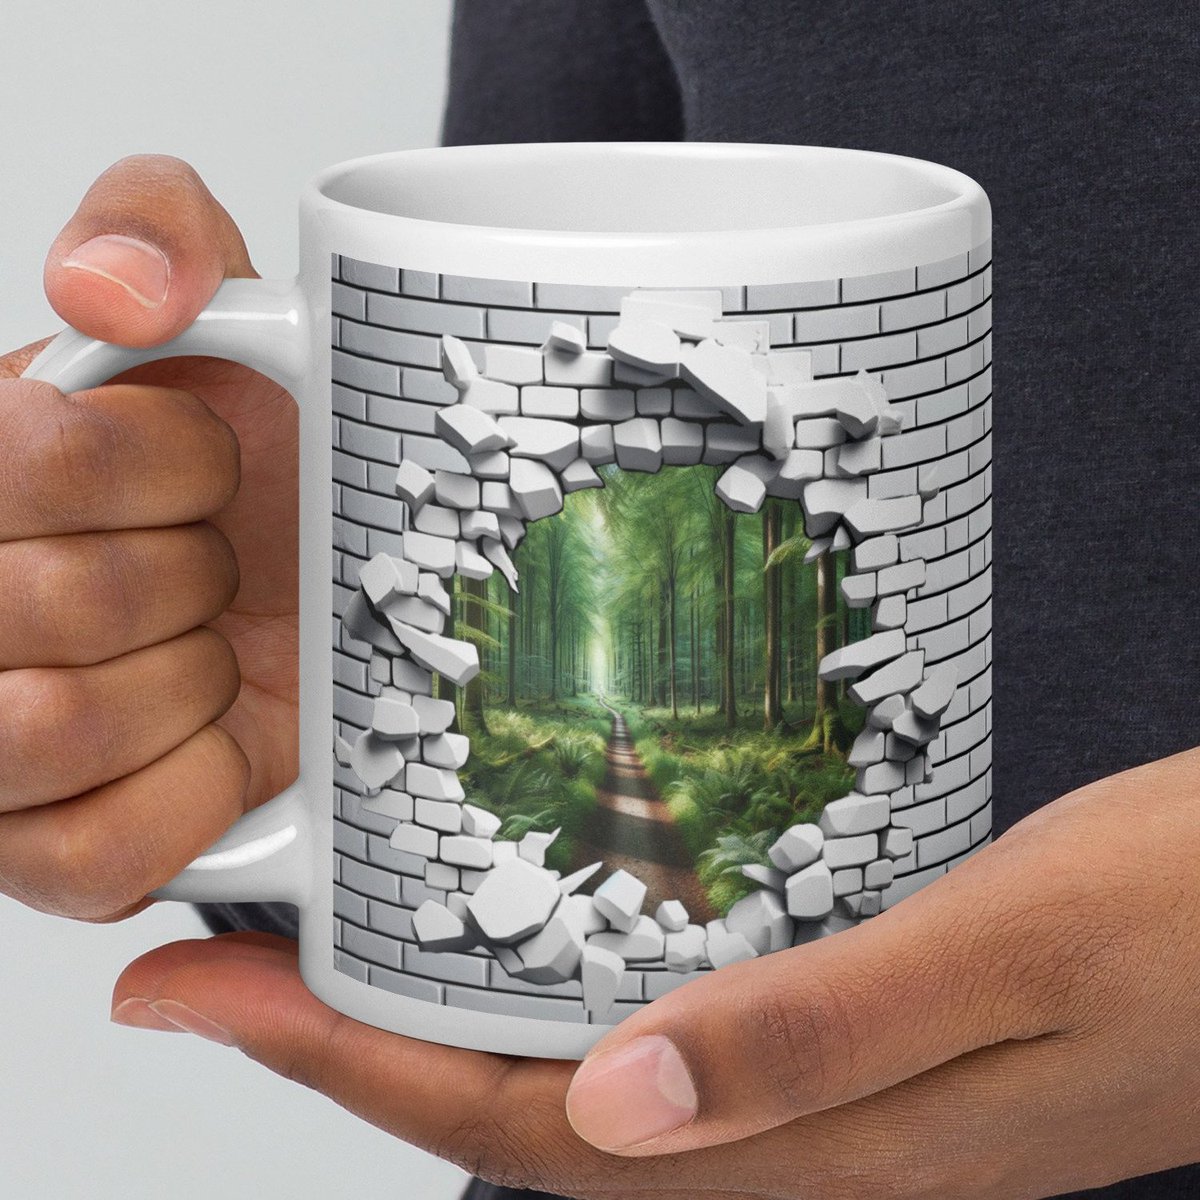 Bring the outdoors to your coffee time. ☕🌲 Our Nature Escape Mug offers a tranquil forest path in every sip. Perfect for nature enthusiasts! #NatureMug #ForestPath #CoffeeBreak
shhcreations.com/products/natur…